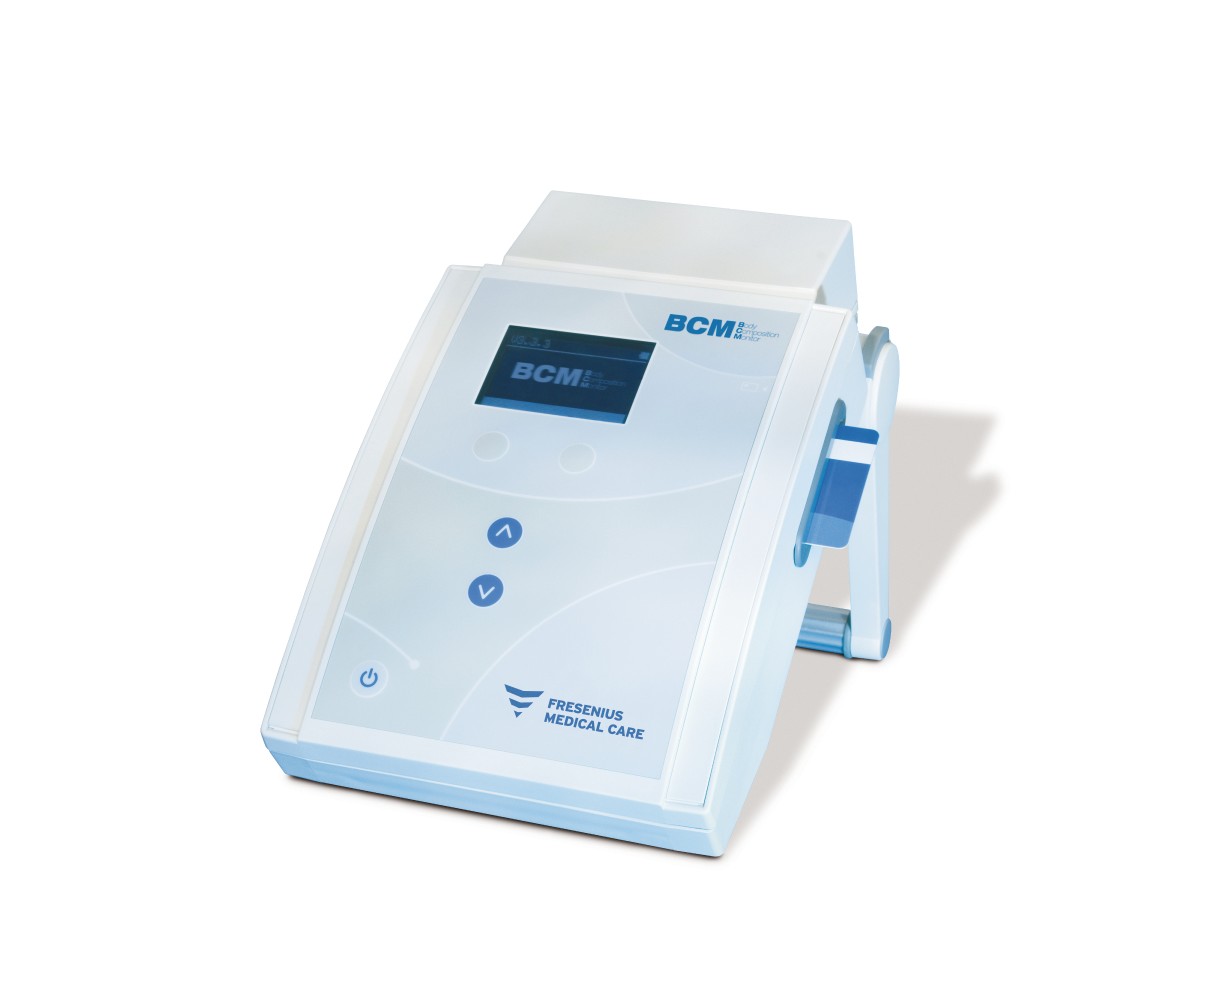 BCM - Body Composition Monitor